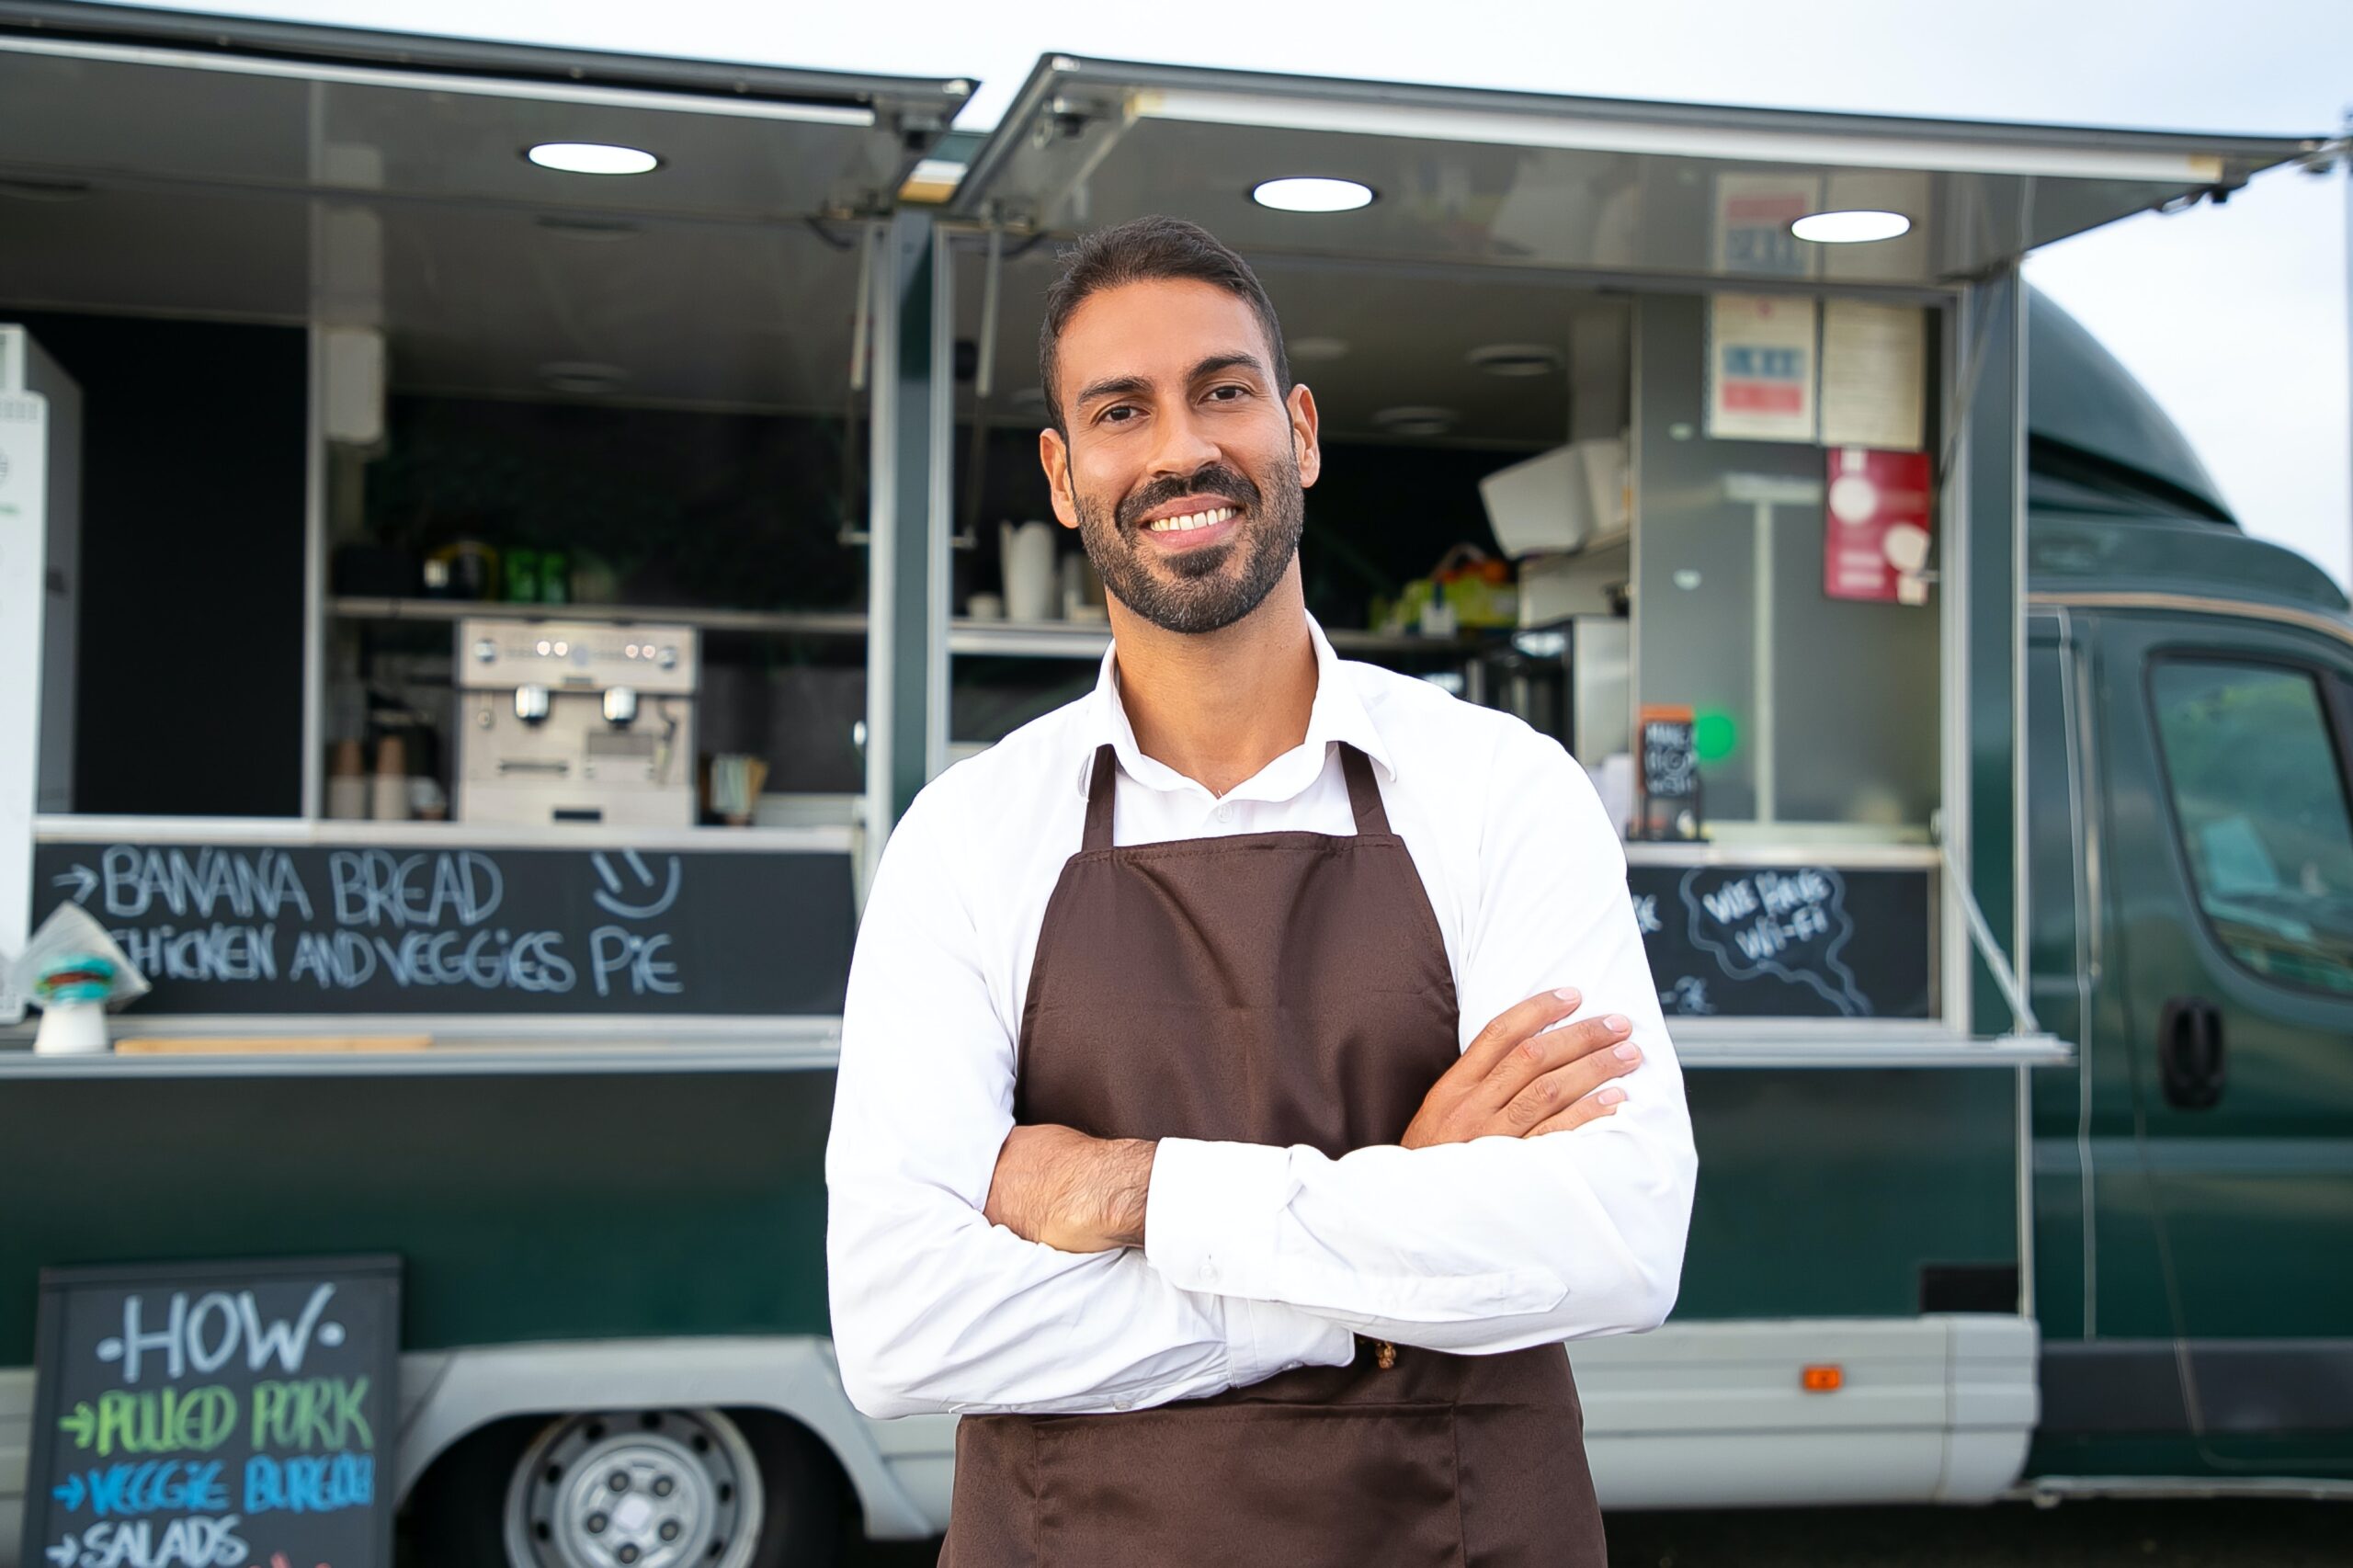 Man standing in front of his food truck in an apron smiling contentedly.